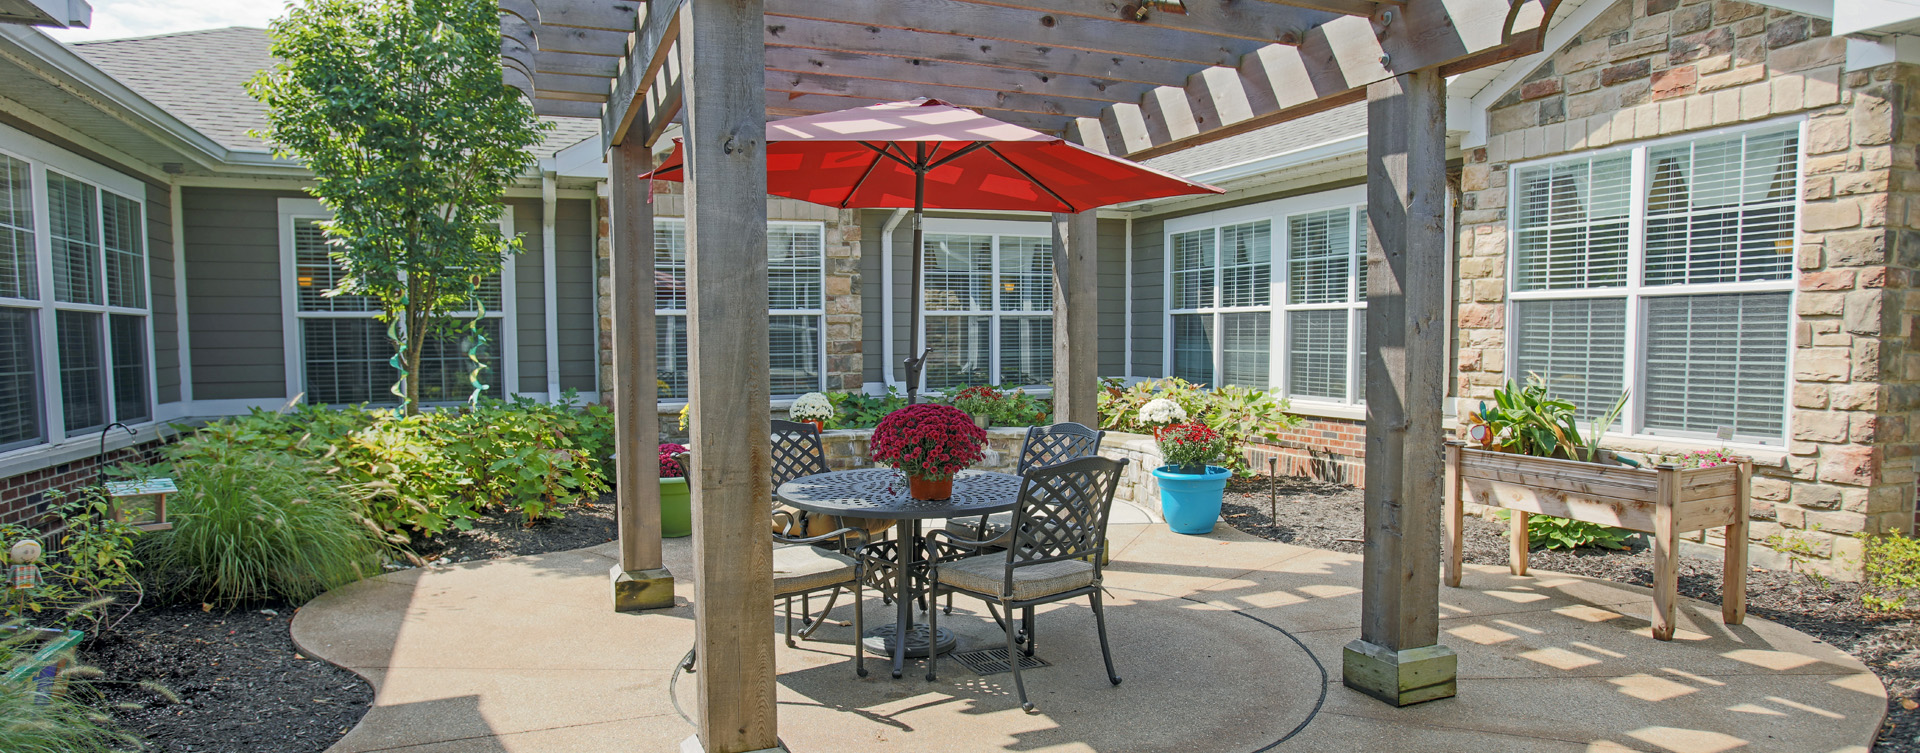 Residents with dementia can enjoy a traveling path, relaxed seating and raised garden beds in the courtyard at Bickford of Carmel